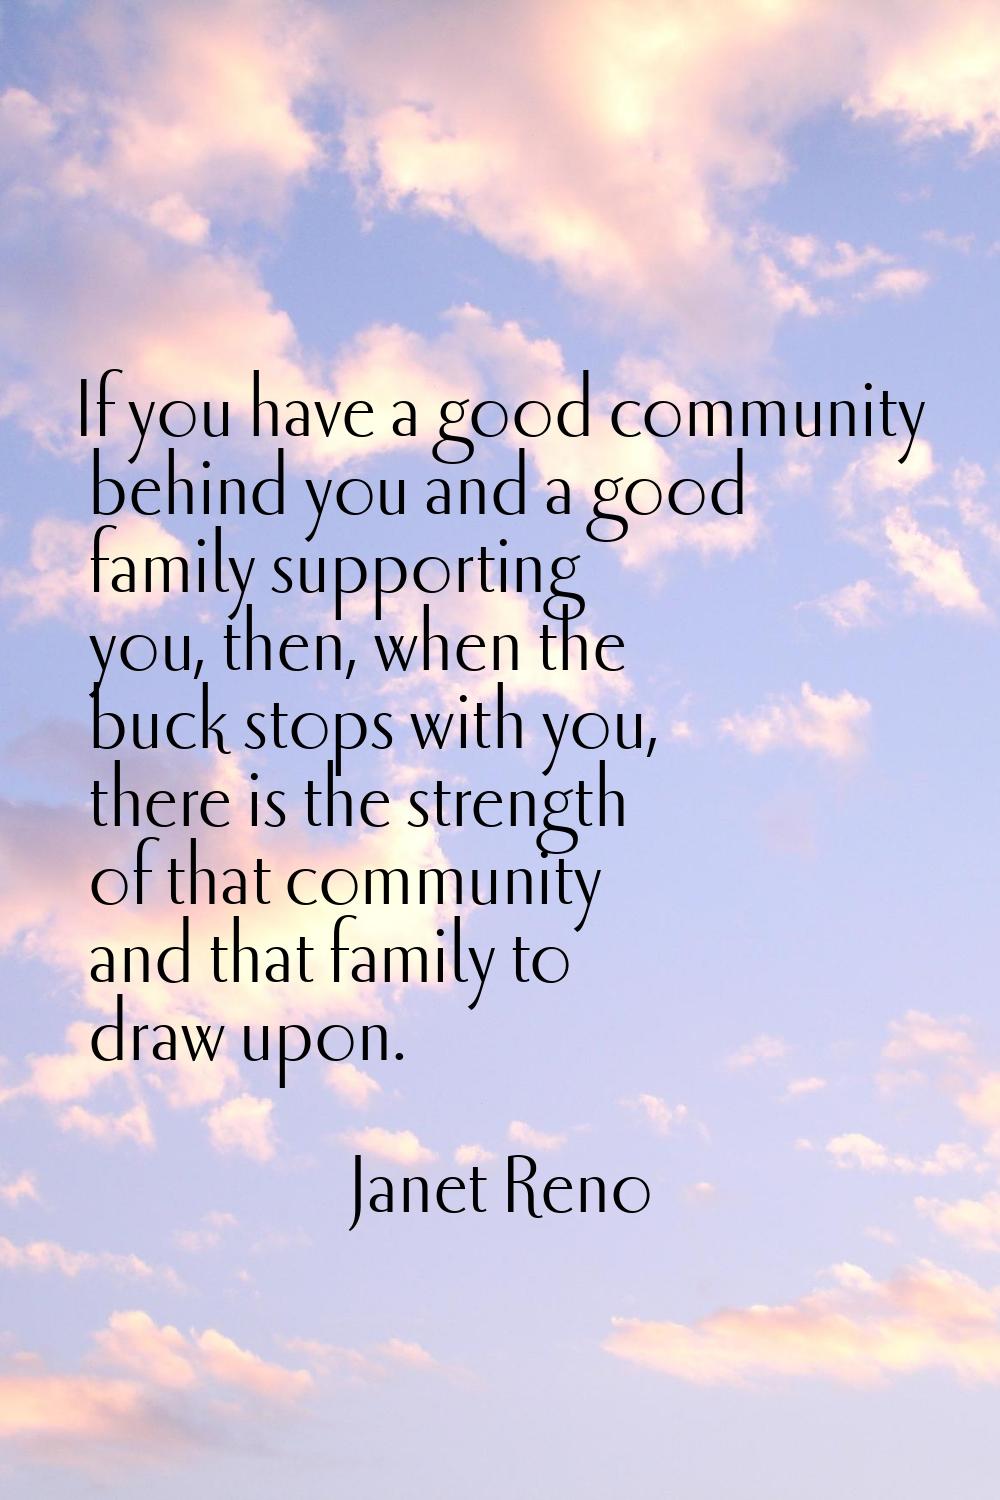 If you have a good community behind you and a good family supporting you, then, when the buck stops